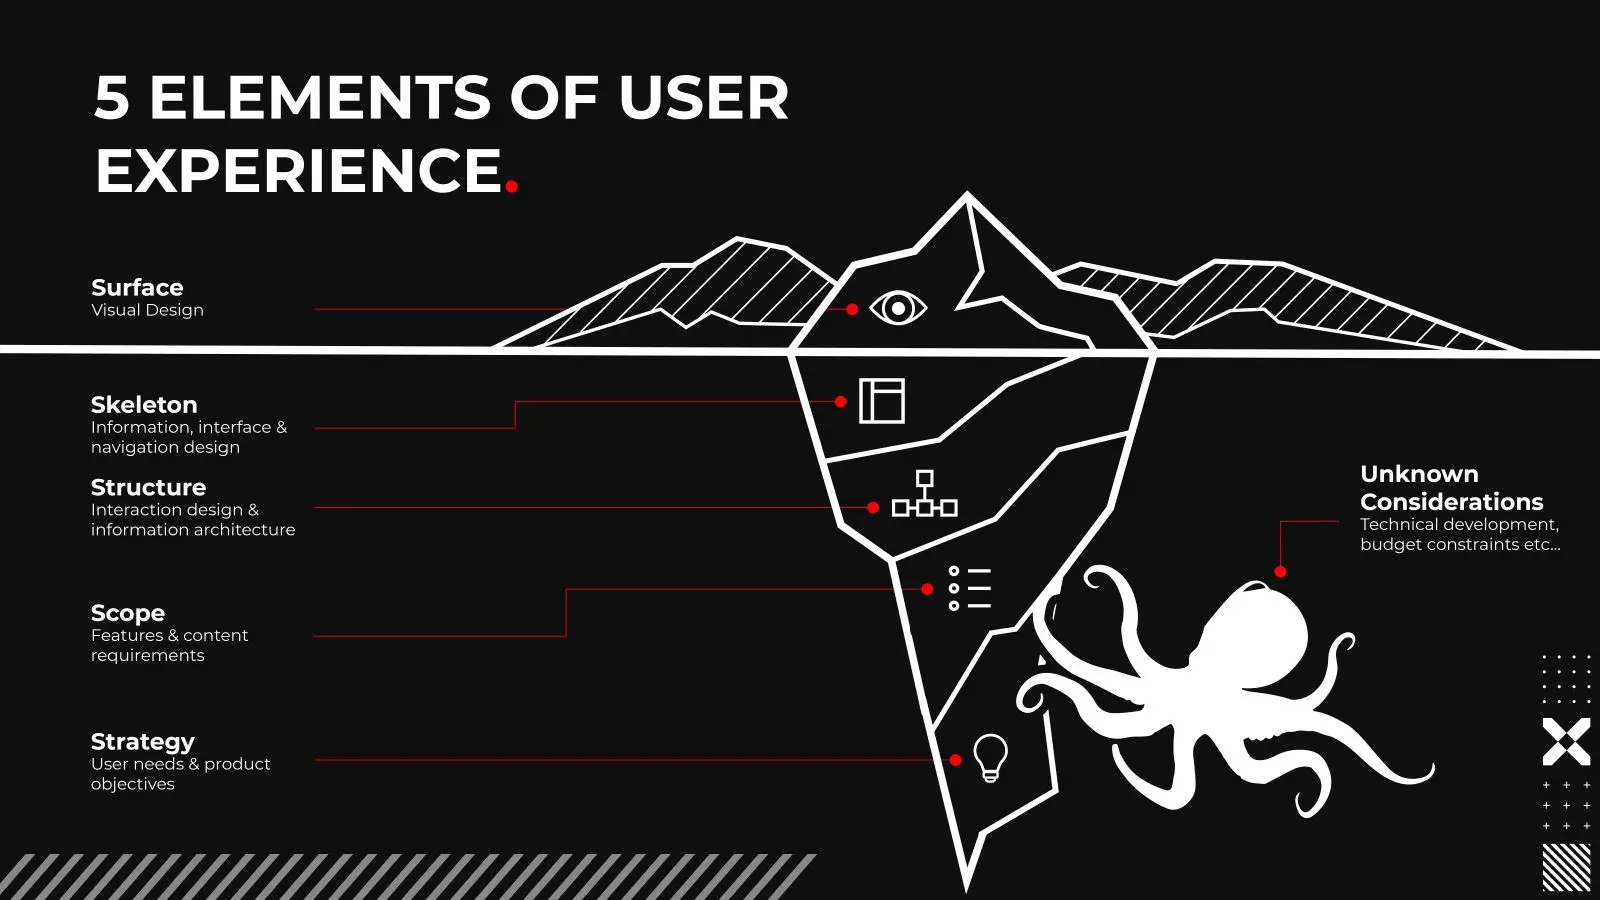 5 elements of user experience and why it's important in web design